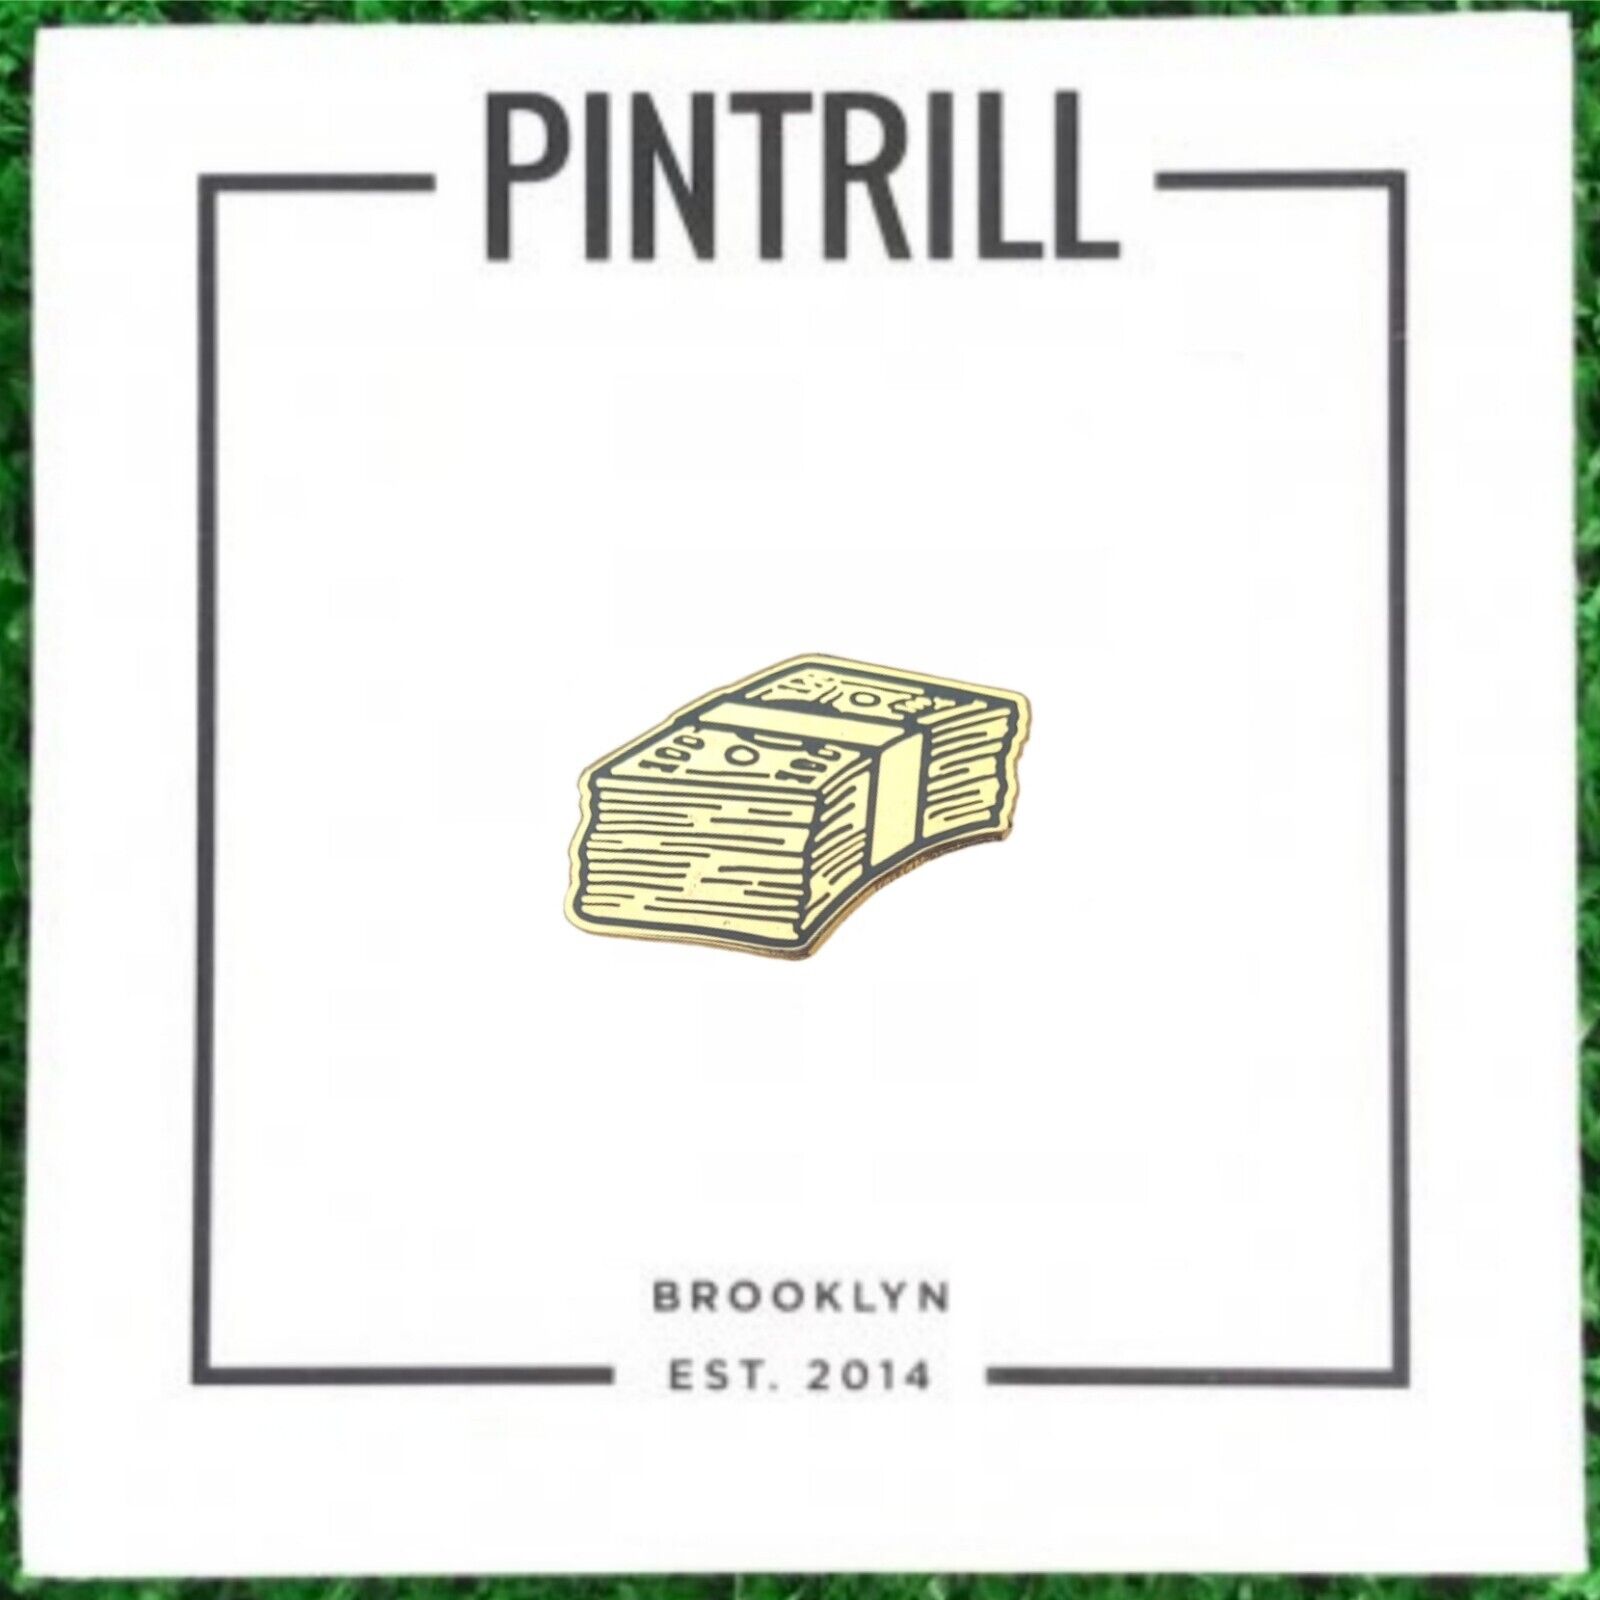 ⚡RARE⚡ PINTRILL STACK OF 100 DOLLAR BILLS PIN *BRAND NEW* LIMITED EDITION 💵